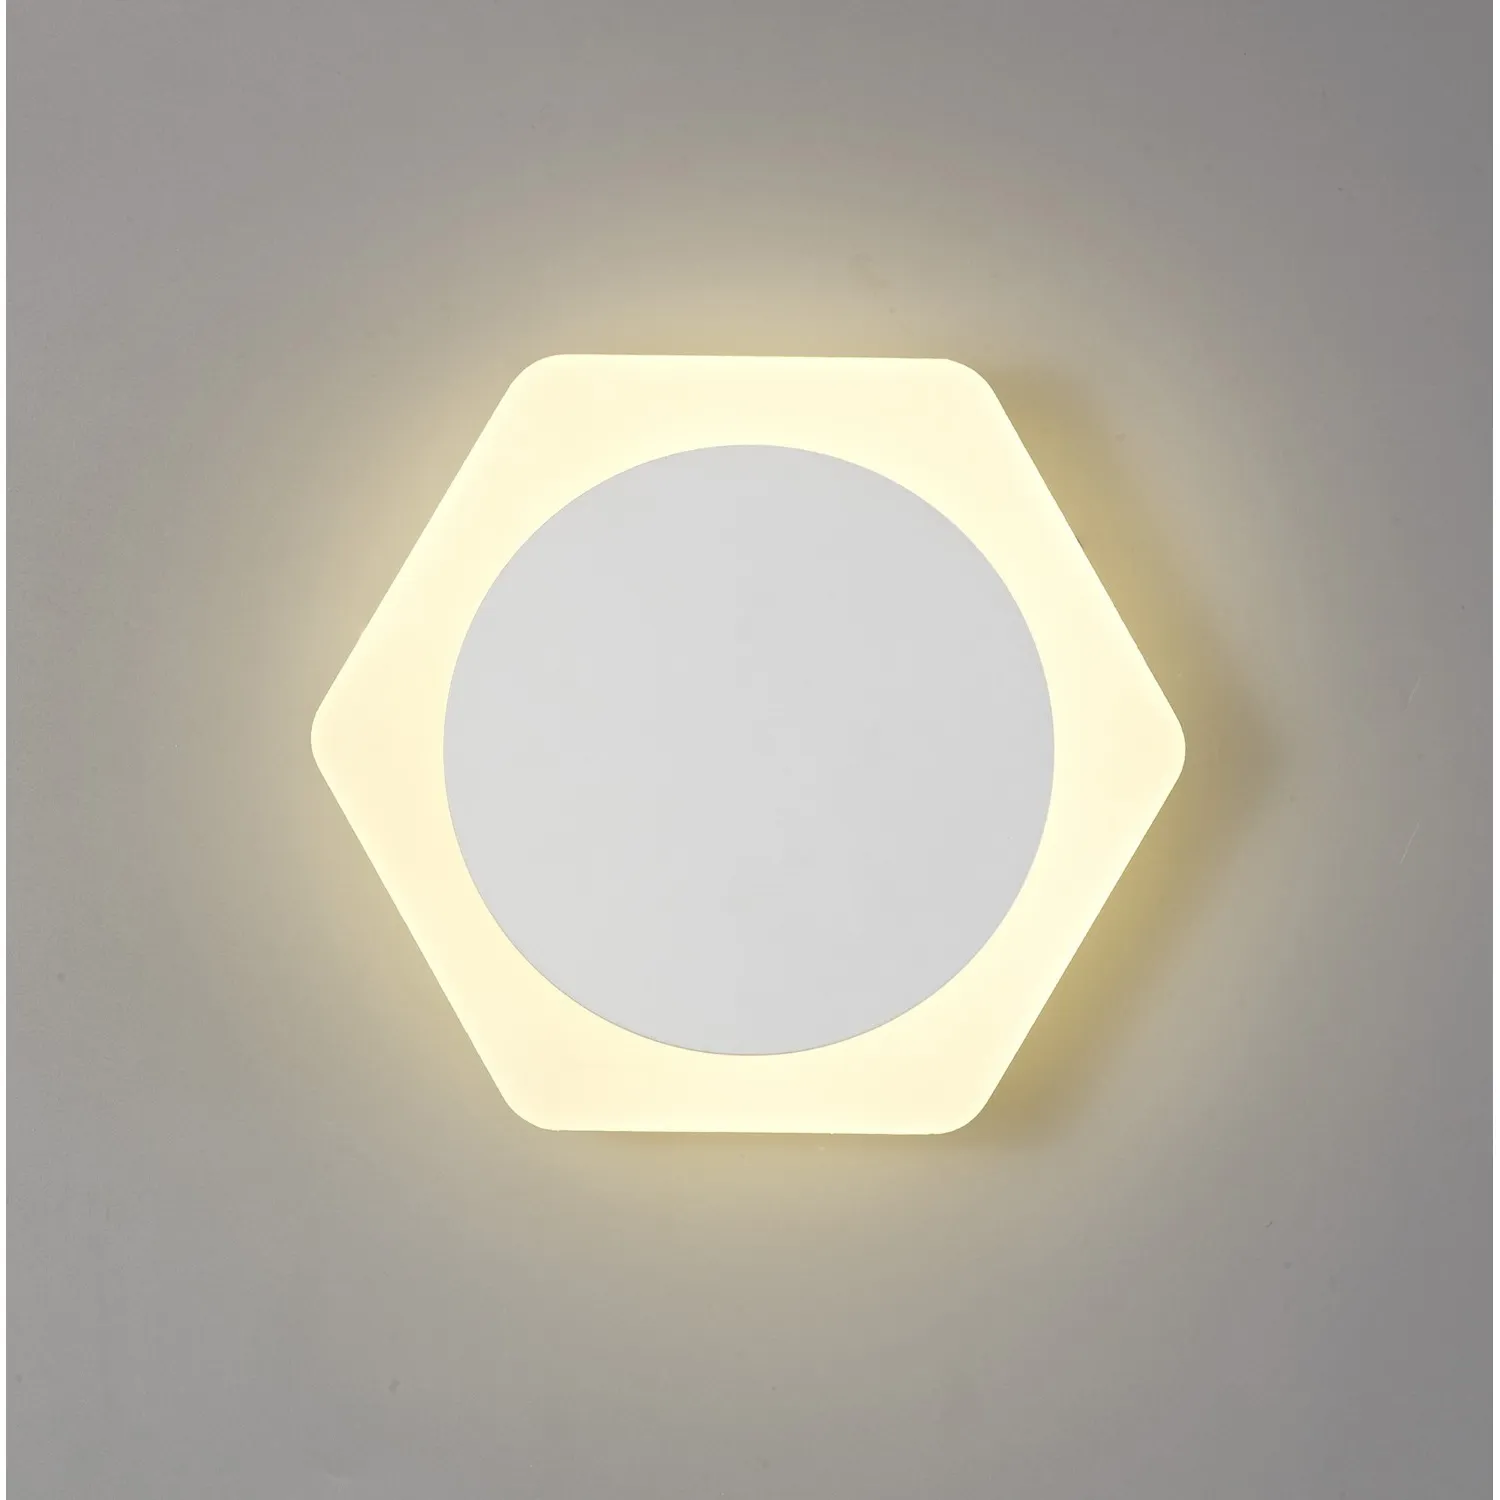 Edgware Magnetic Base Wall Lamp, 12W LED 3000K 498lm, 15cm Round 19cm Horizontal Hexagonal Centre, Sand White Acrylic Frosted Diffuser